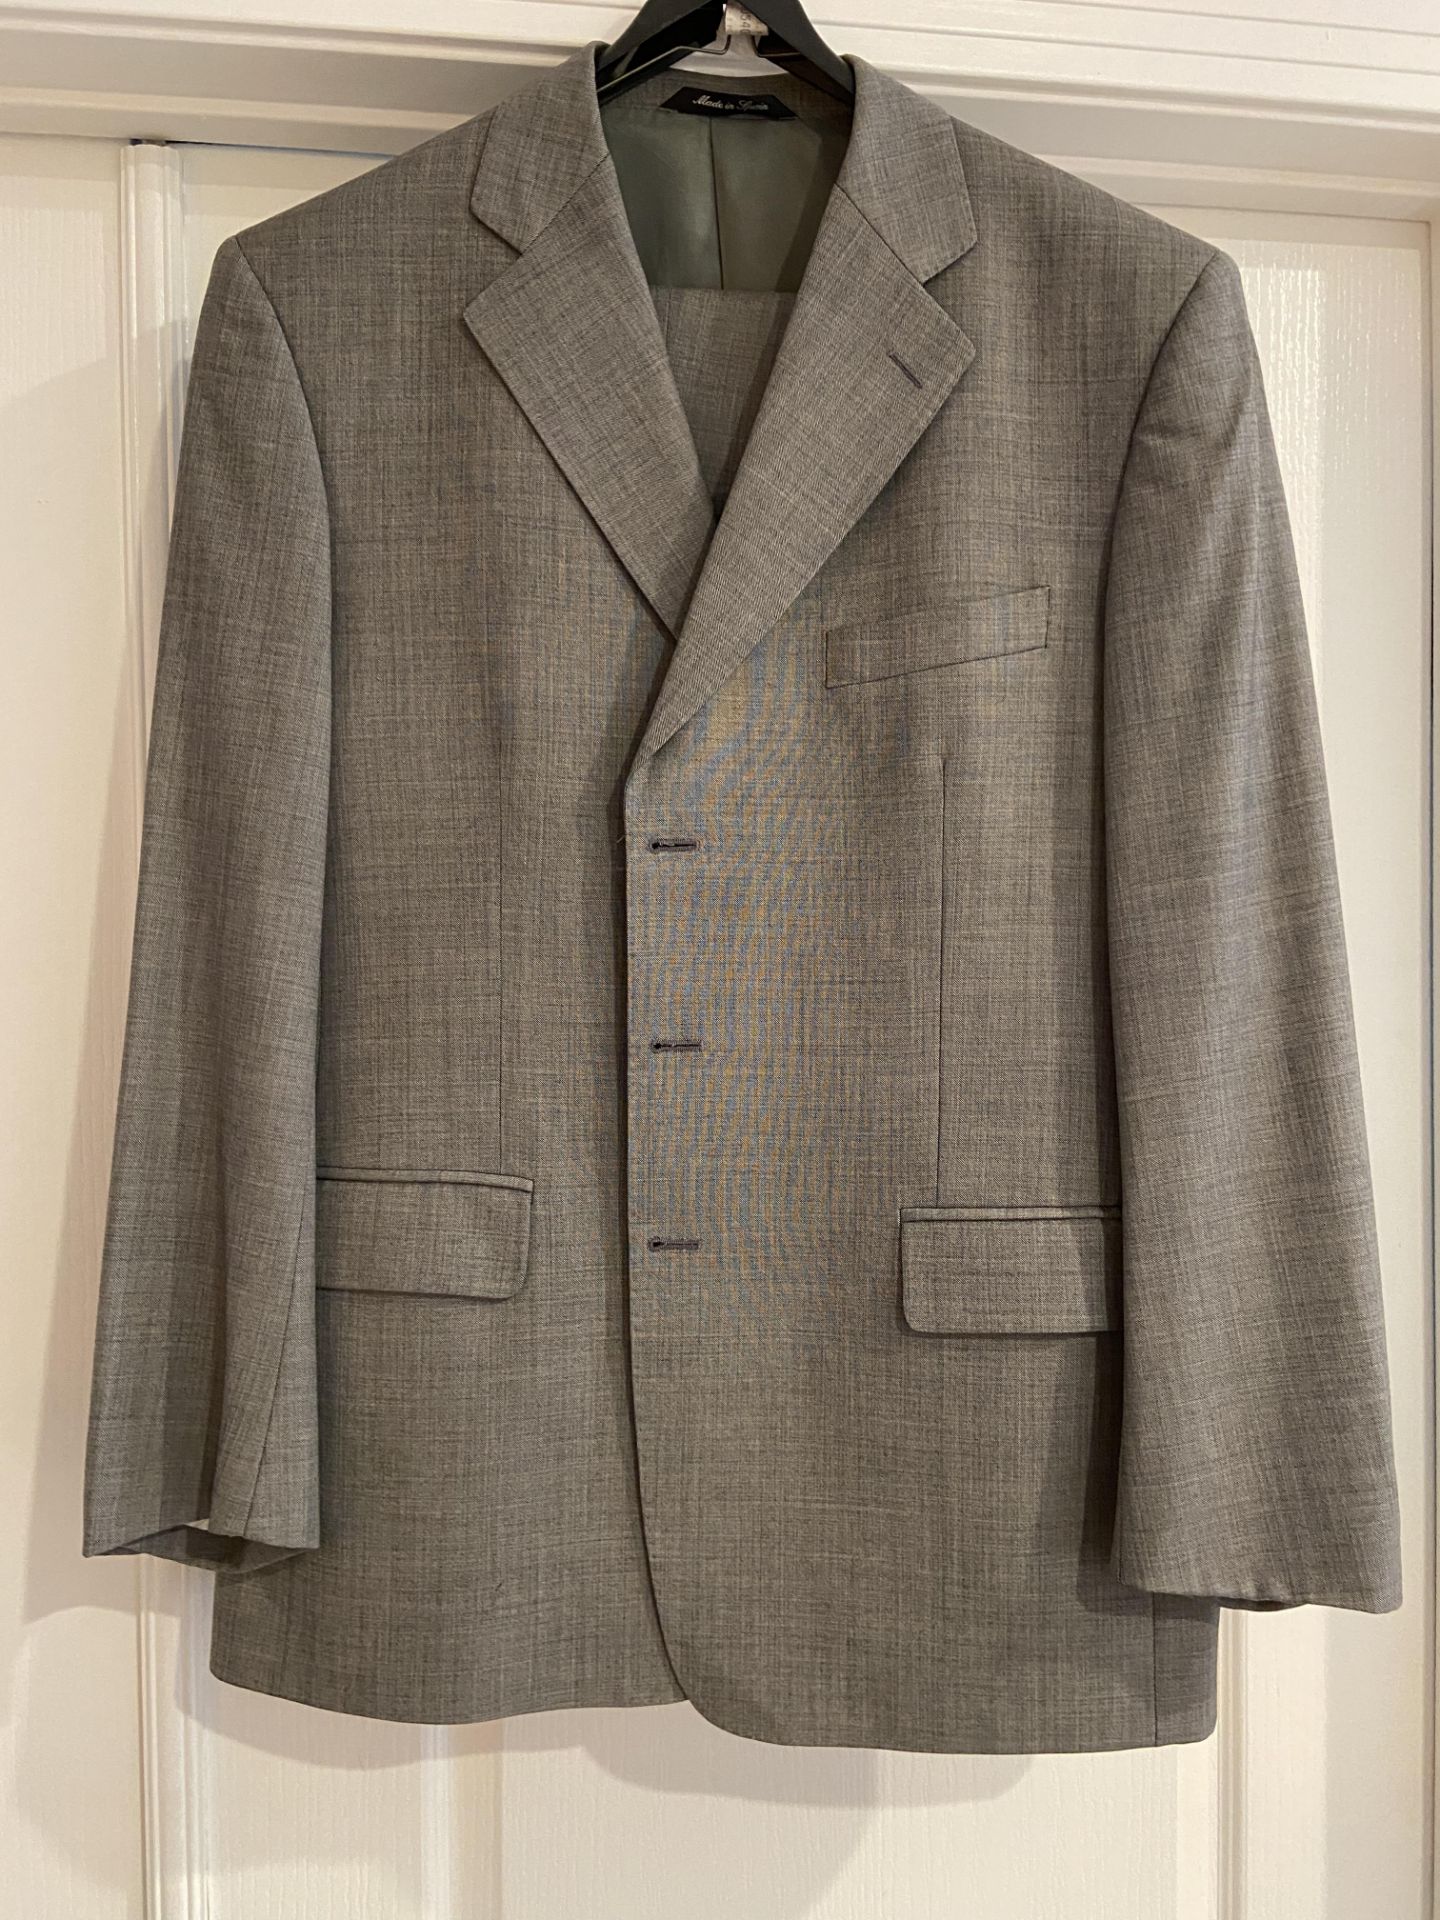 Collection of High End Men's Clothing: 6 Suits Size 42R, 1 Sport Jacket Size 42R, 1 Polo XL - Image 10 of 18